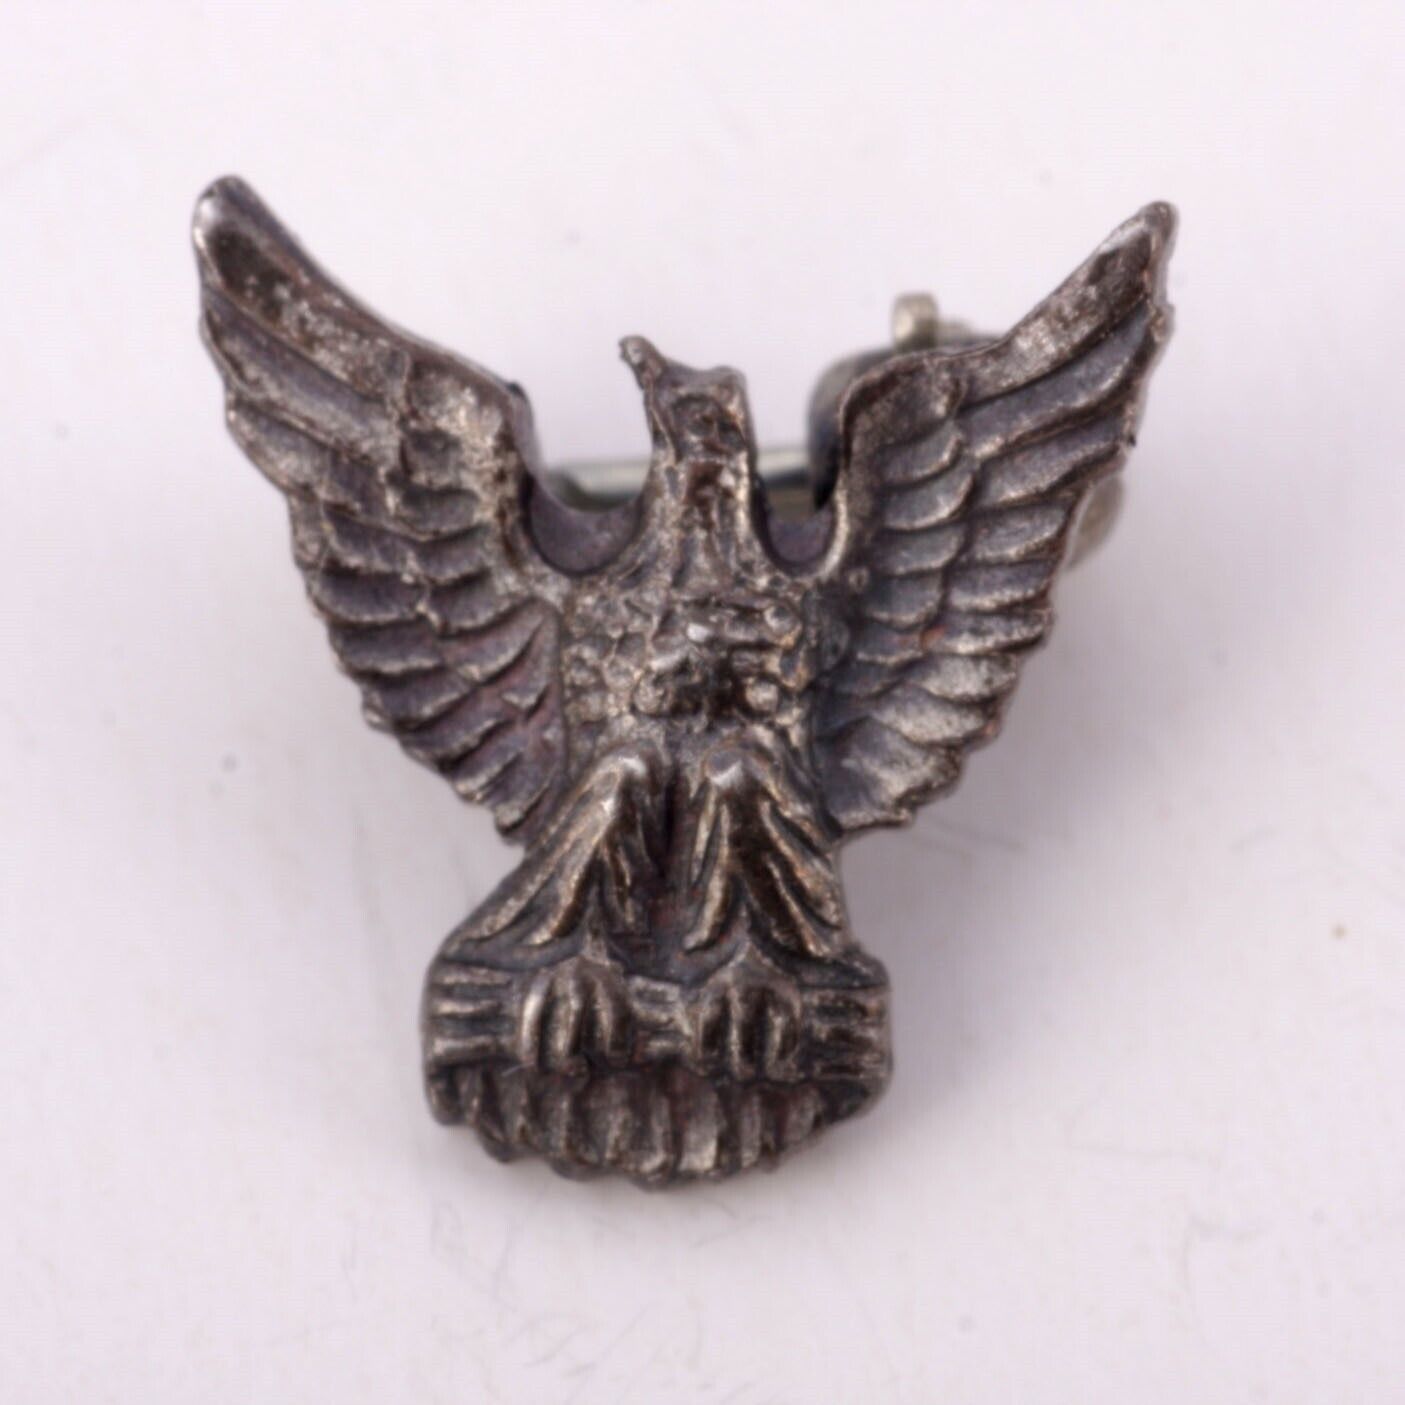 Primary image for Vintage Sterling Silver Eagle Pin Boy Scouts of America Eagle Award Lapel Brooch